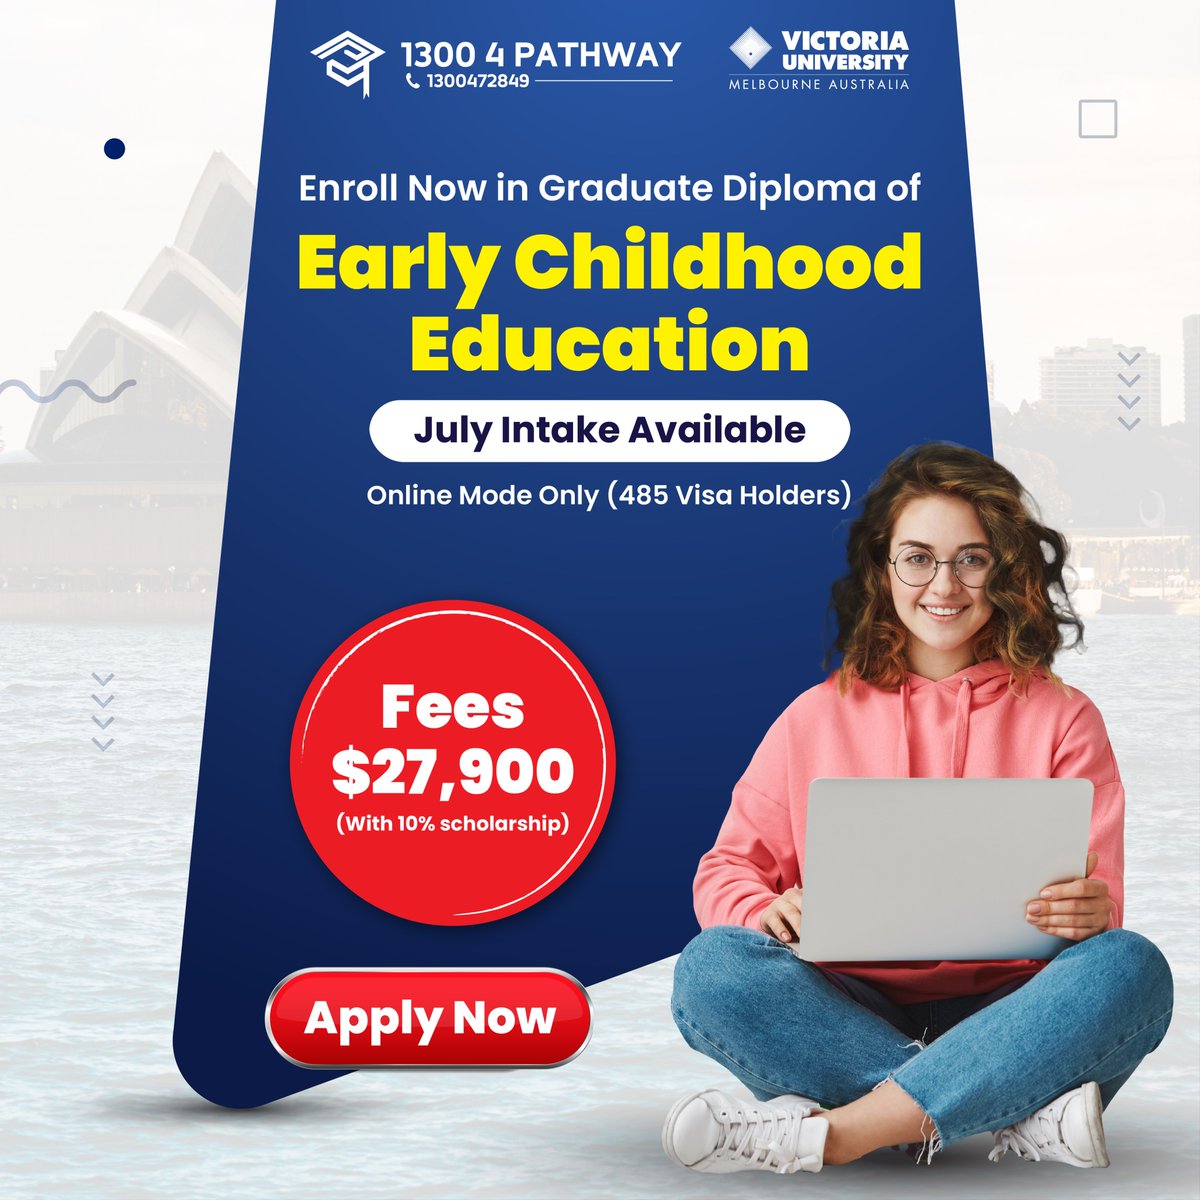 👉🎓Enroll Now in Graduate Diploma of Early Childhood Education 💰Fees $27,900 (With 10% scholarshipp #Earlychildhood #Earlychildhoodeducation #Victoriauniversity #Graduatediploma #Scholarship #Julyintake #485visa #visaservices #migrationagent #migrationserviceinmelbourne